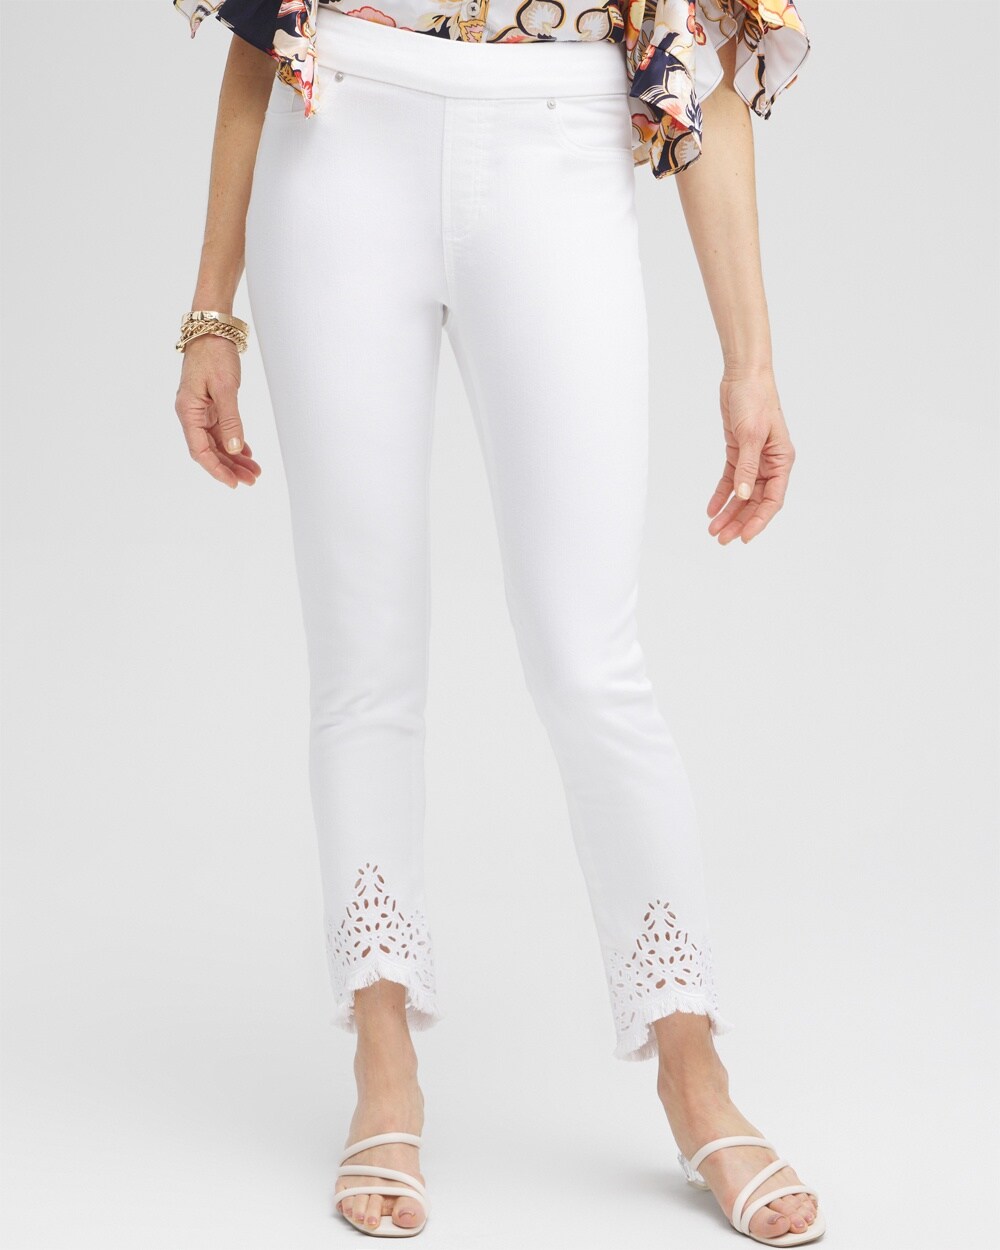 Chico's Eyelet Tulip Hem Pull-on Ankle Jeggings In White Size 6p |